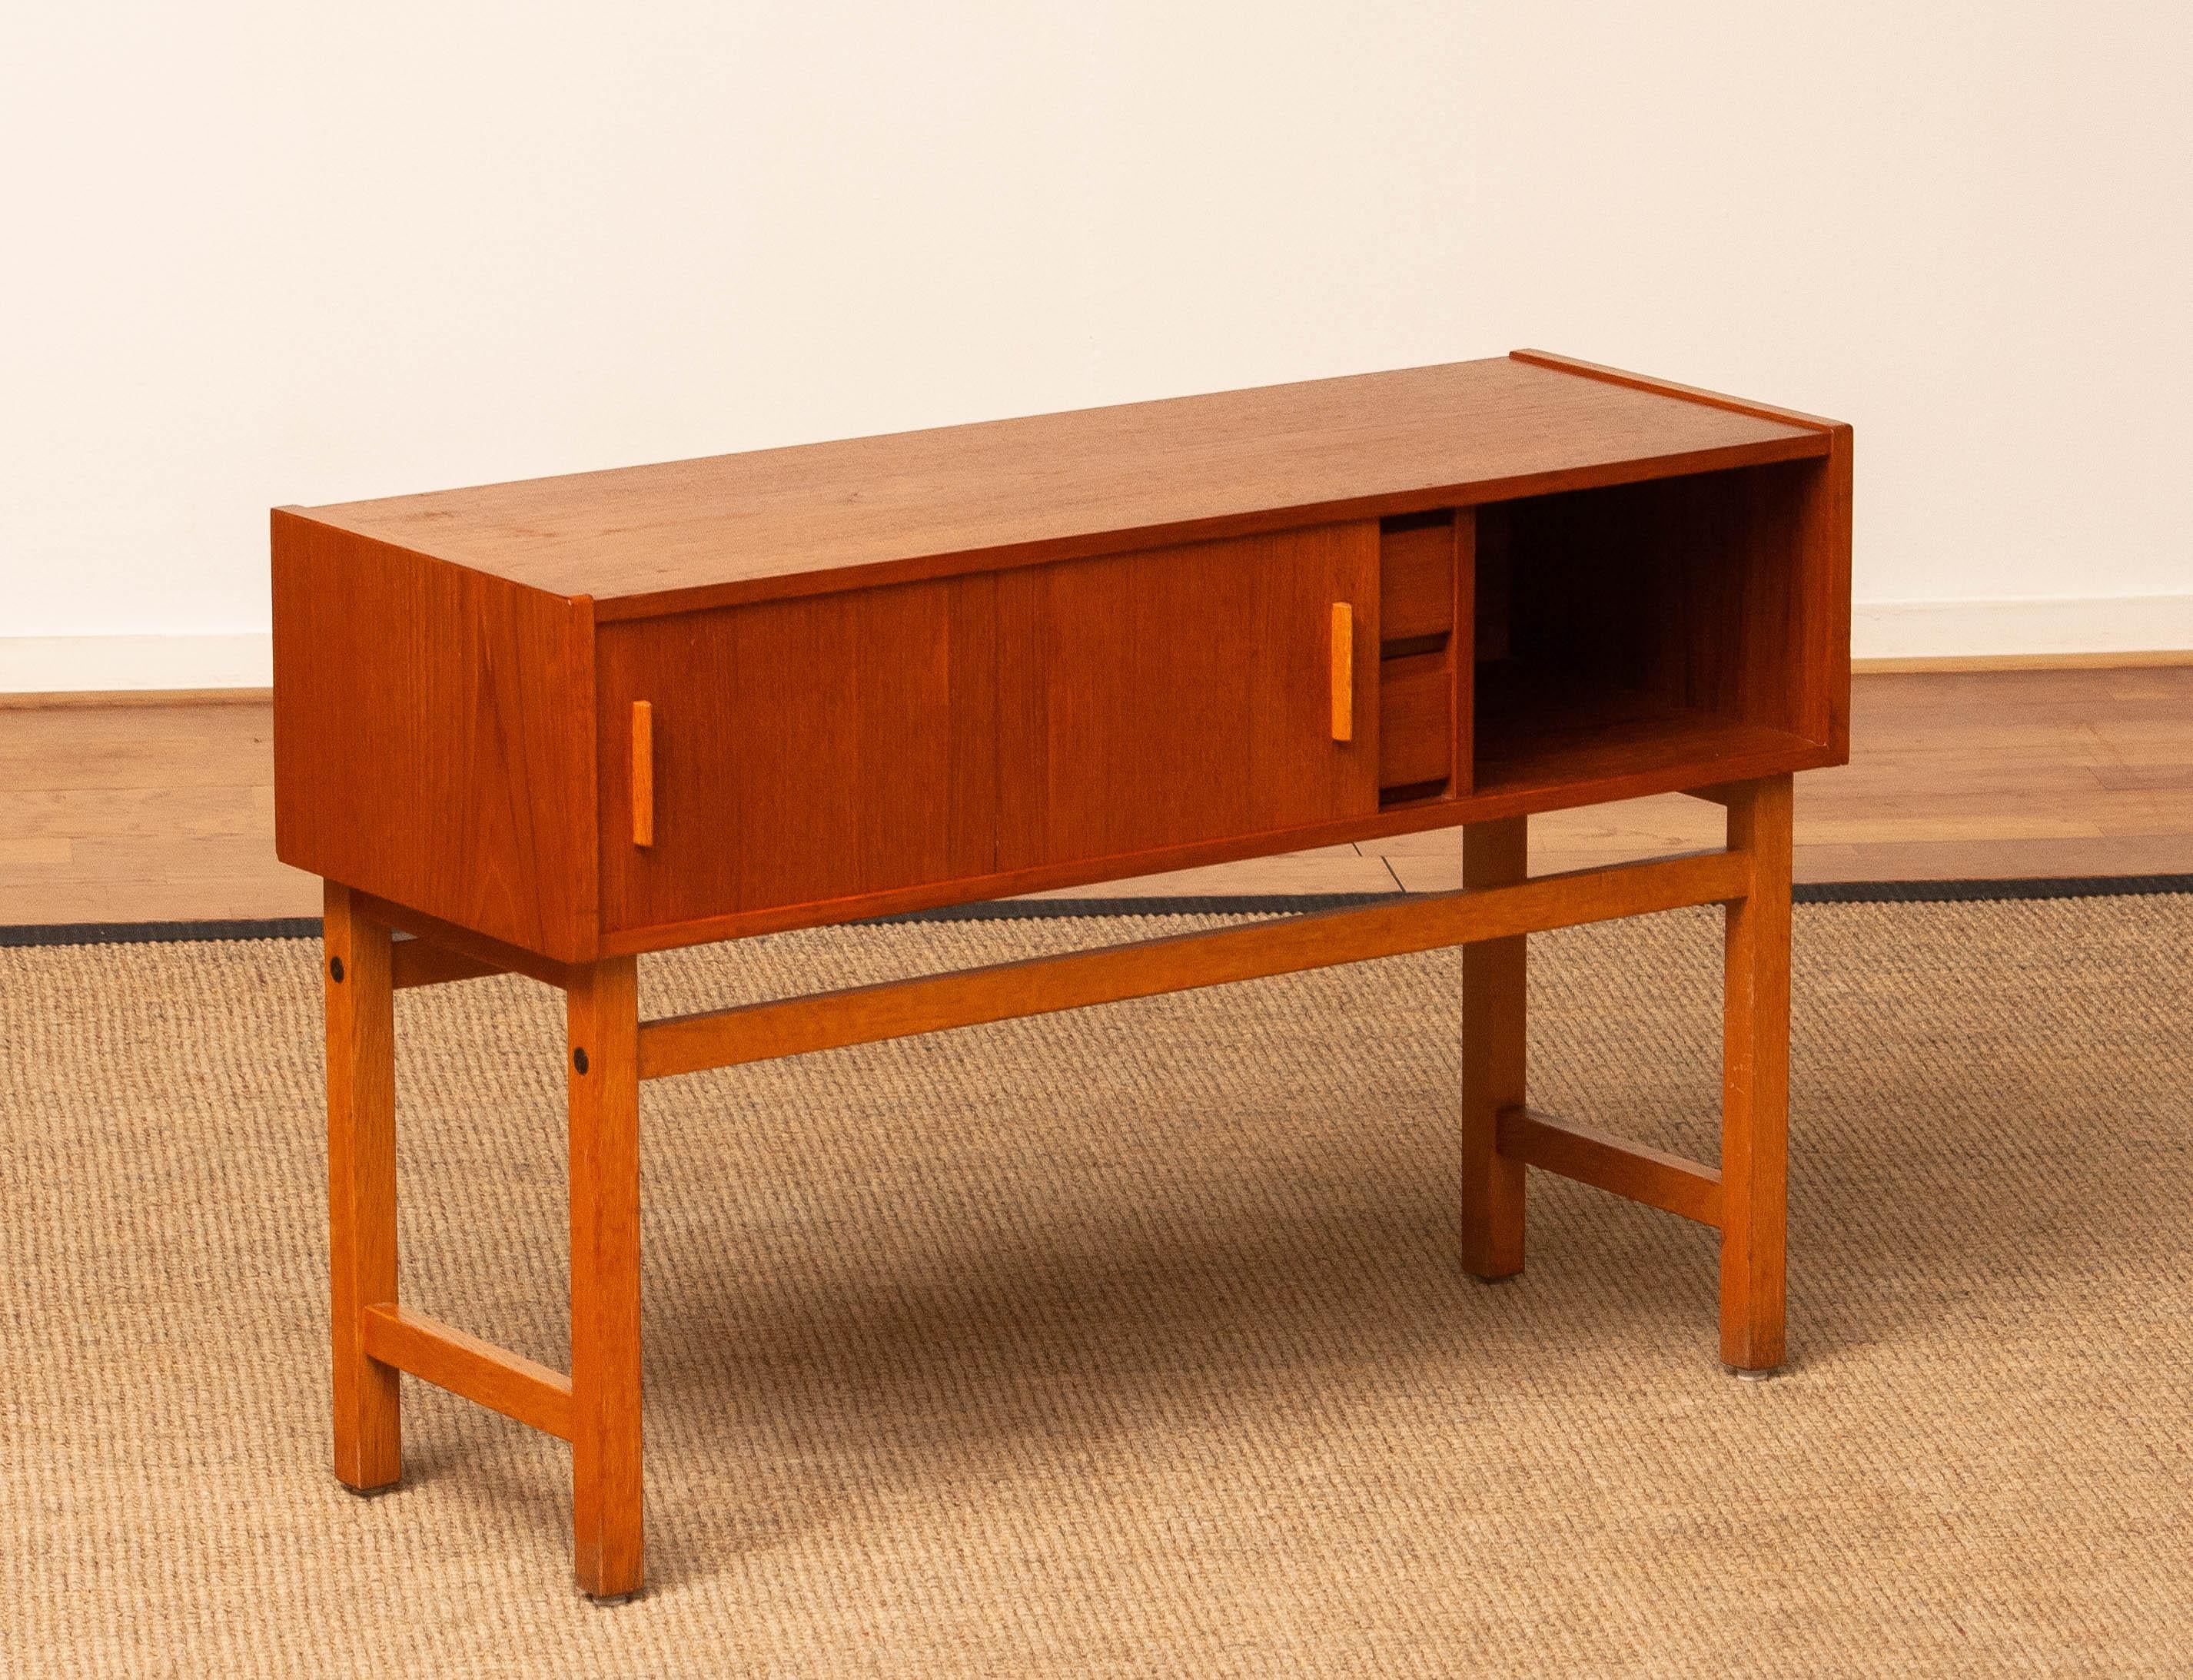 Beech 1960s Teak Cabinet / Credenzas / Console With Drawers And Sliding Doors. Sweden. For Sale